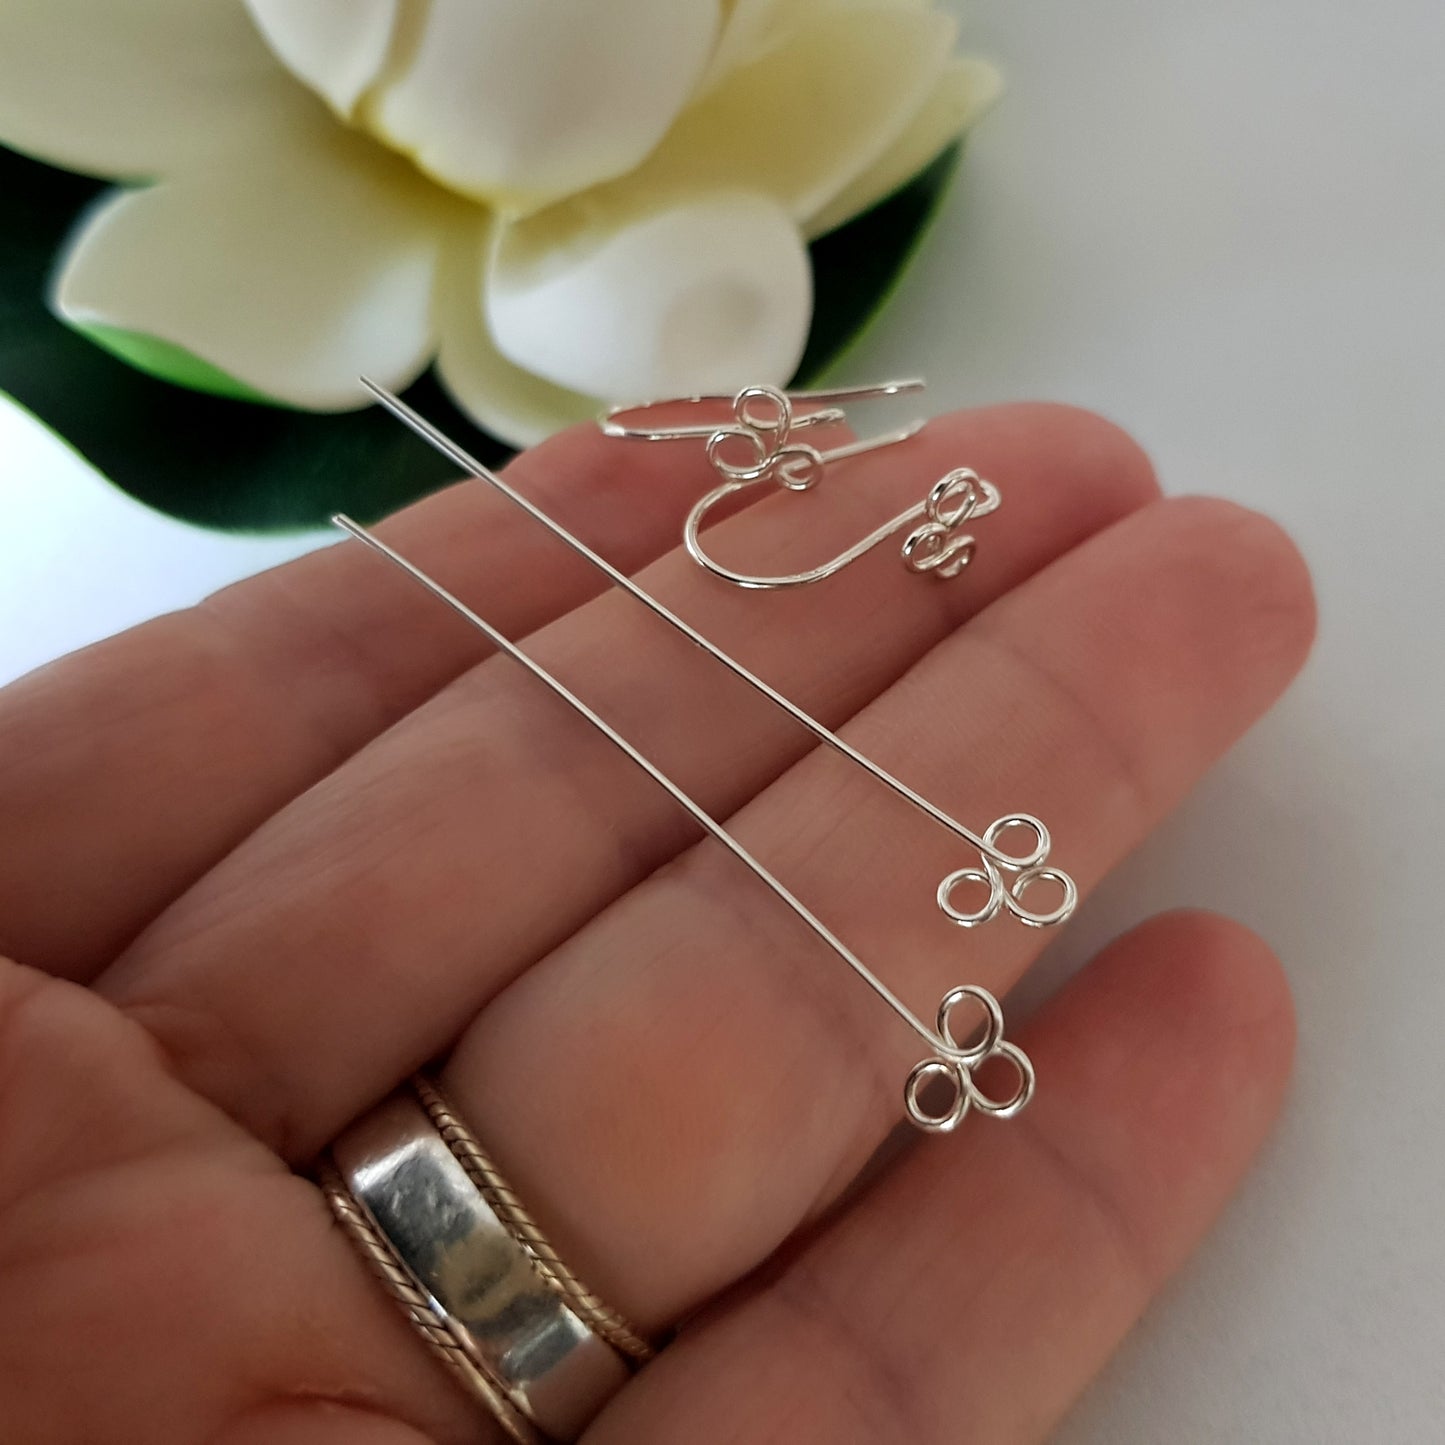 Ear Hook & Headpin Set [10 Pairs] Fancy Clover Solid Sterling Silver | SS-029cEHset | Earring Making Supply